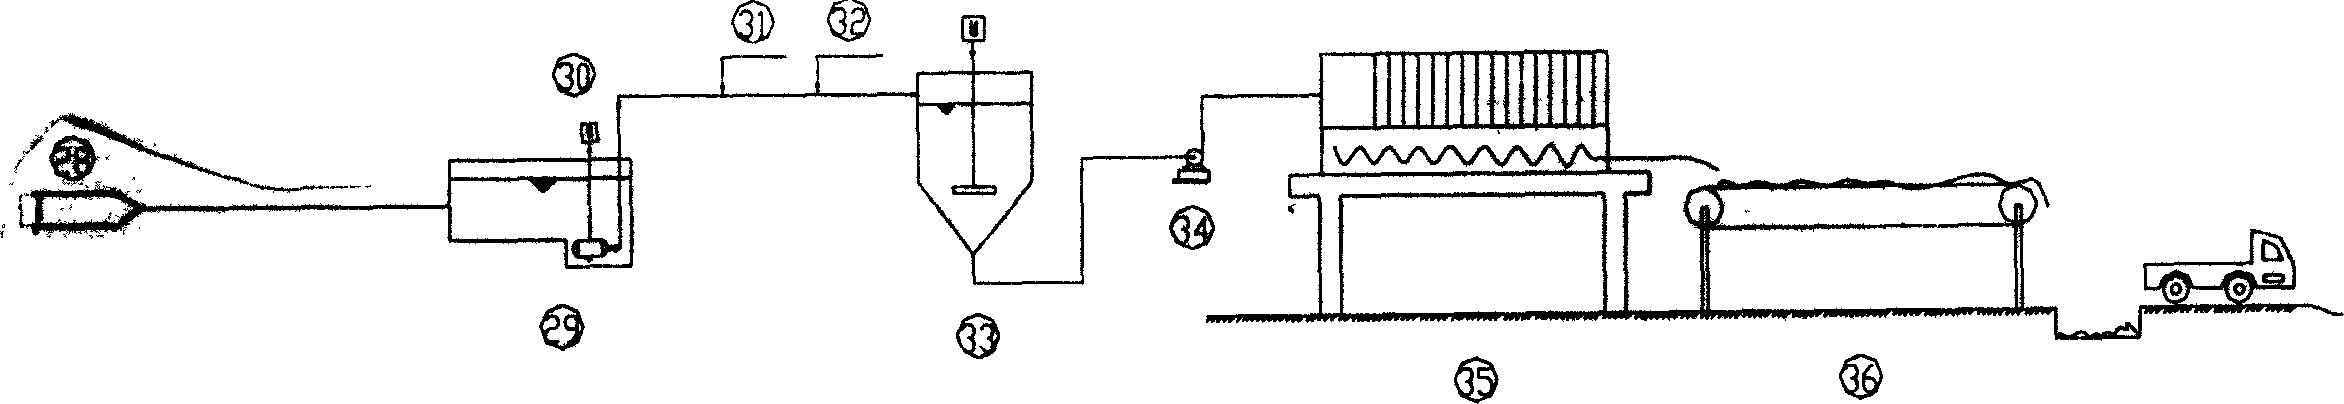 Technique for feeding water to boiler of reclaiming heat from treating sewage of thick oil